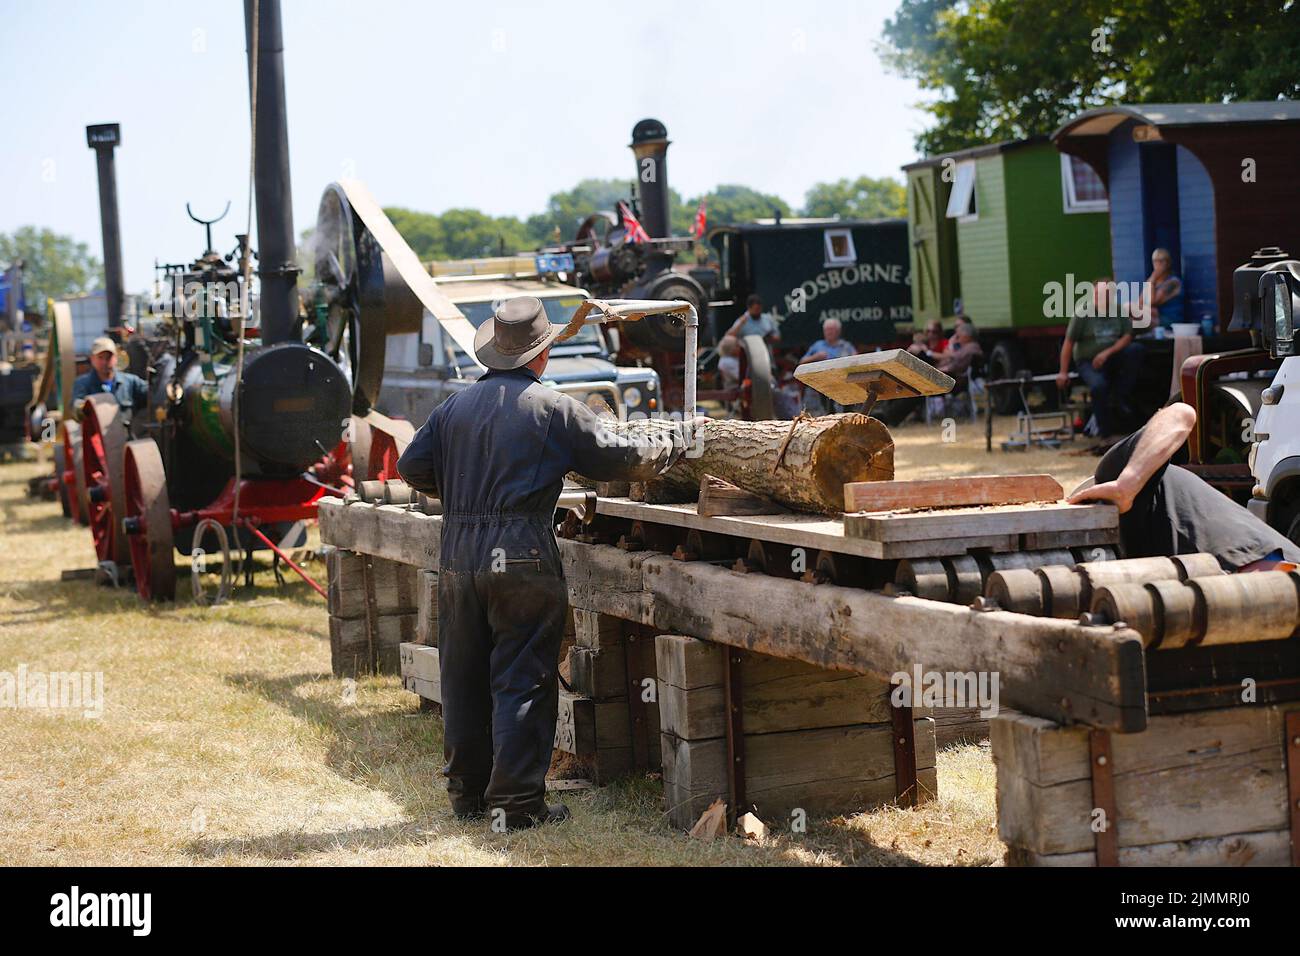 Woodchurch, Kent, UK. 07 August, 2022. On a hot and sunny day in the Kent countryside thousands of people arrive at one of the largest steam rally events in the south east. Logging timber with steam engine. Photo Credit: Paul Lawrenson/Alamy Live News Stock Photo